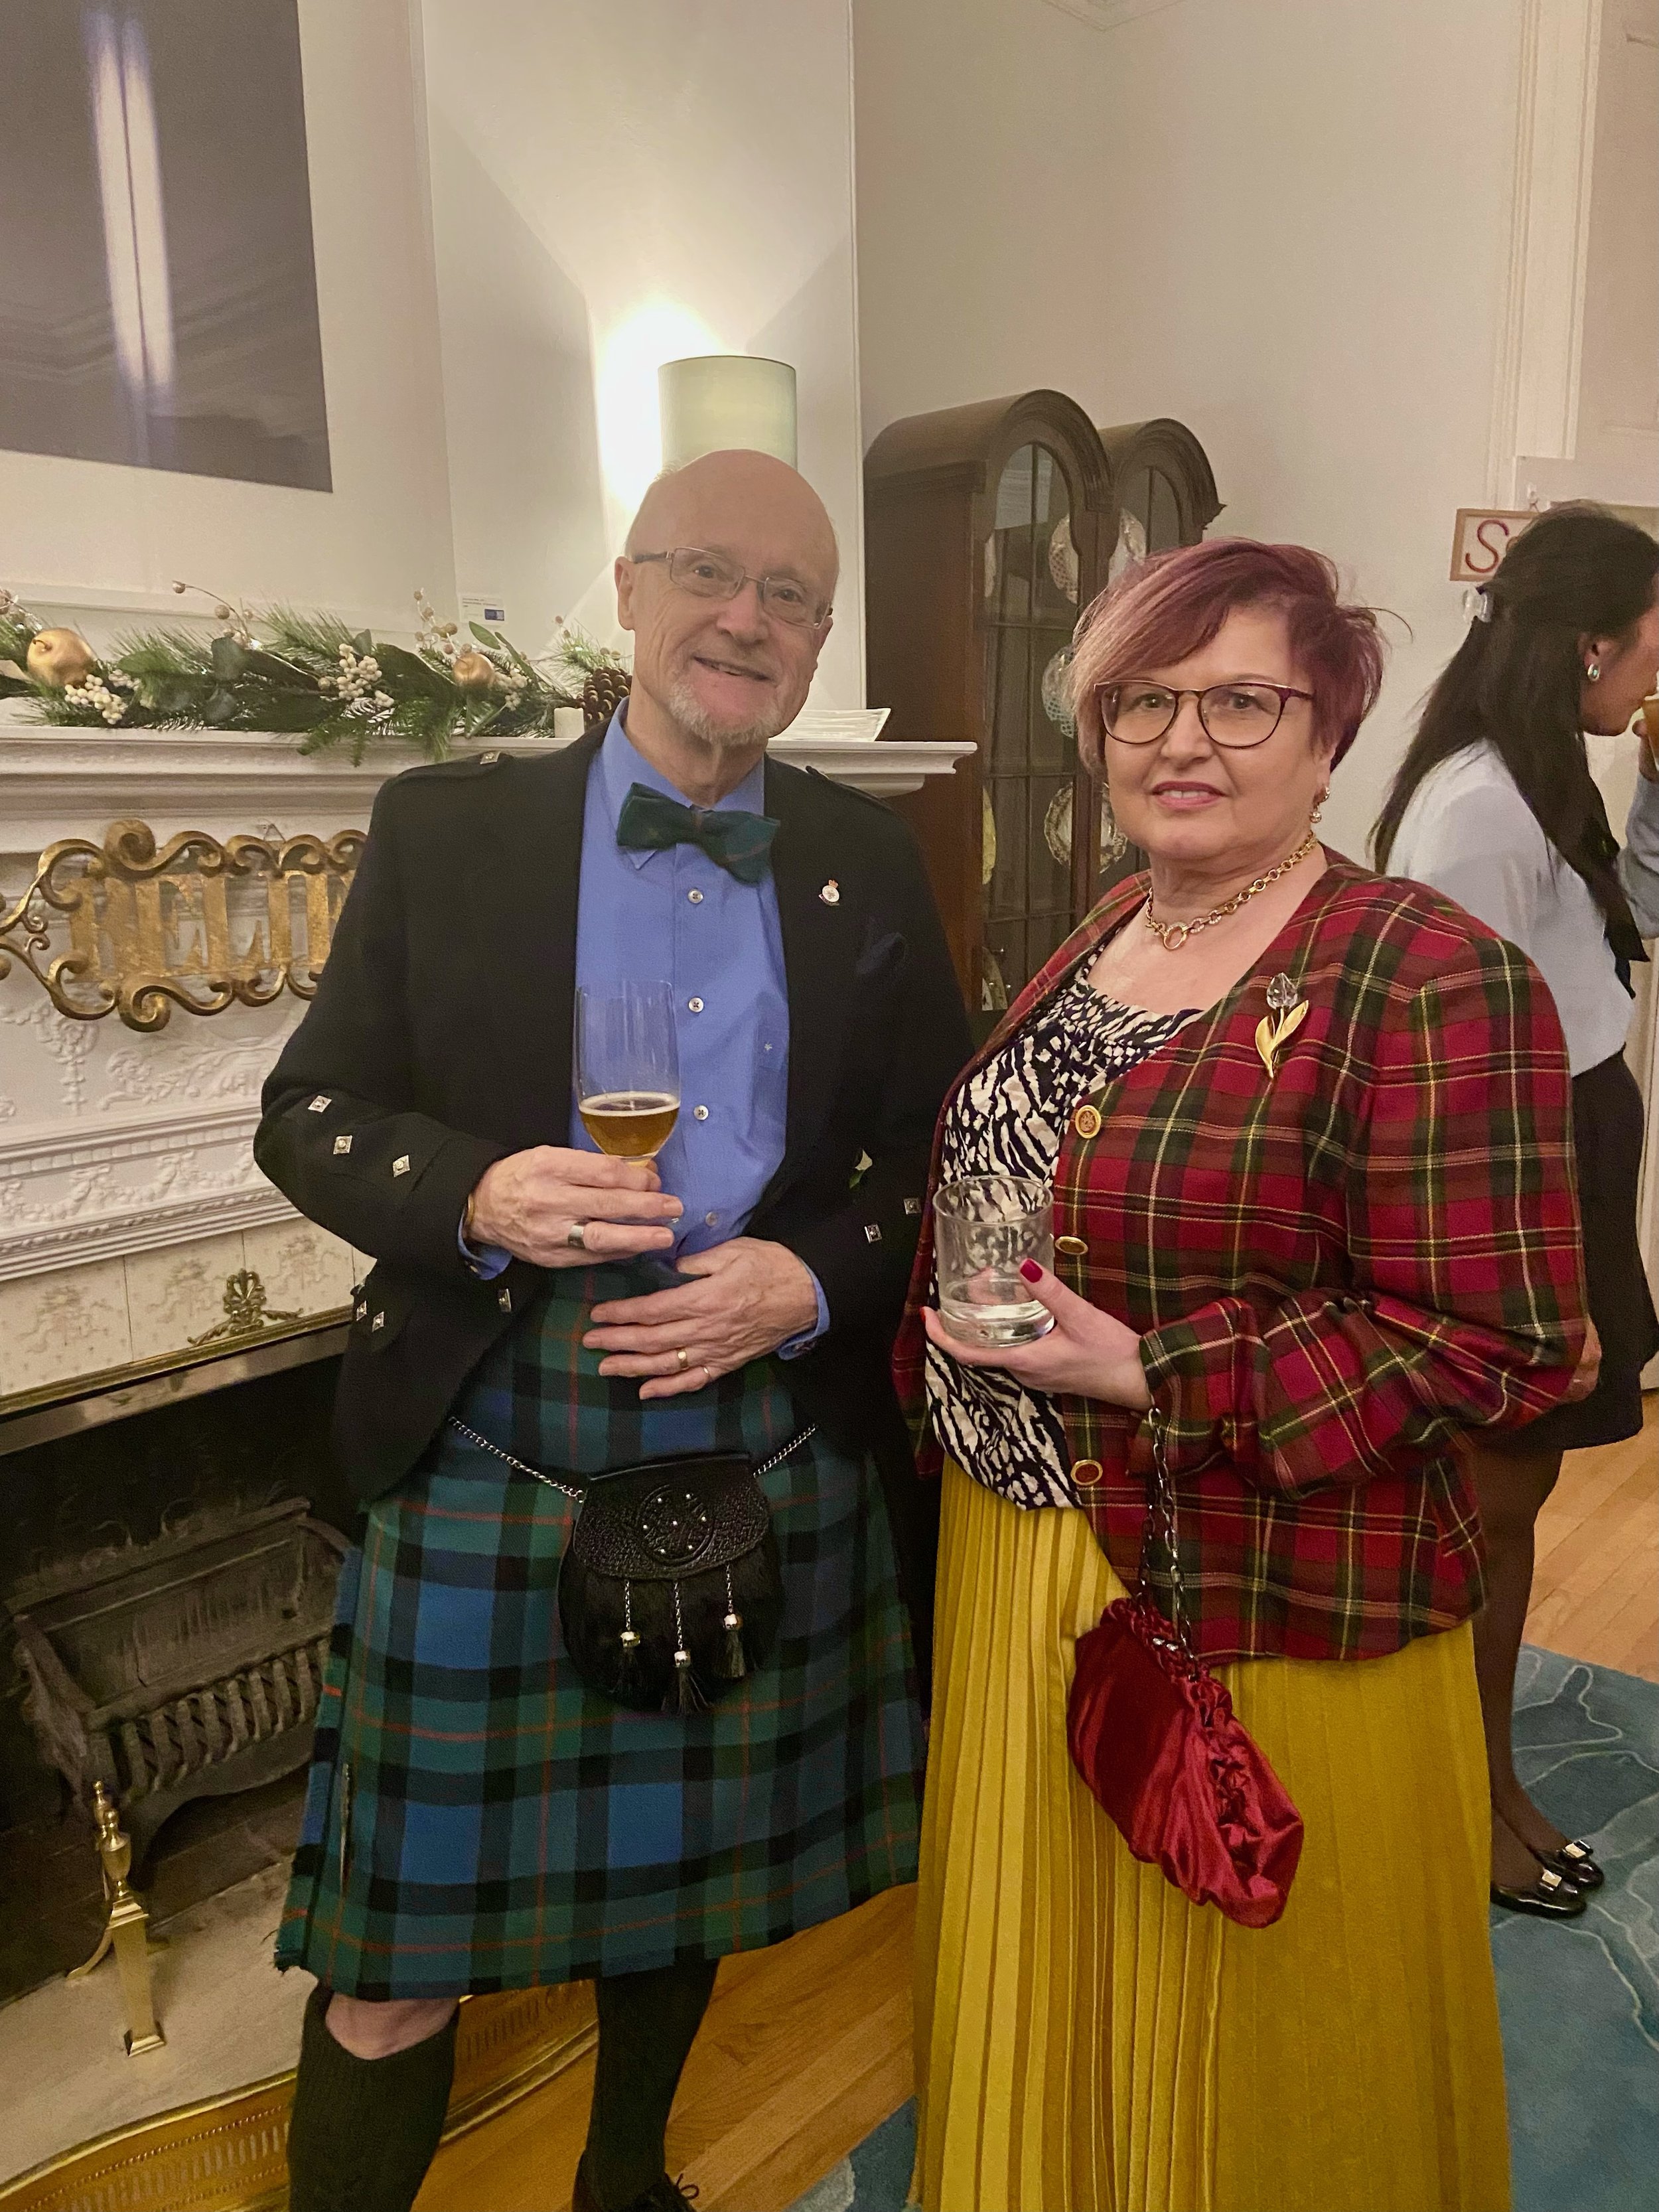 Alan James, President of the St. Andrew’s Society of Ottawa, and his wife Allly